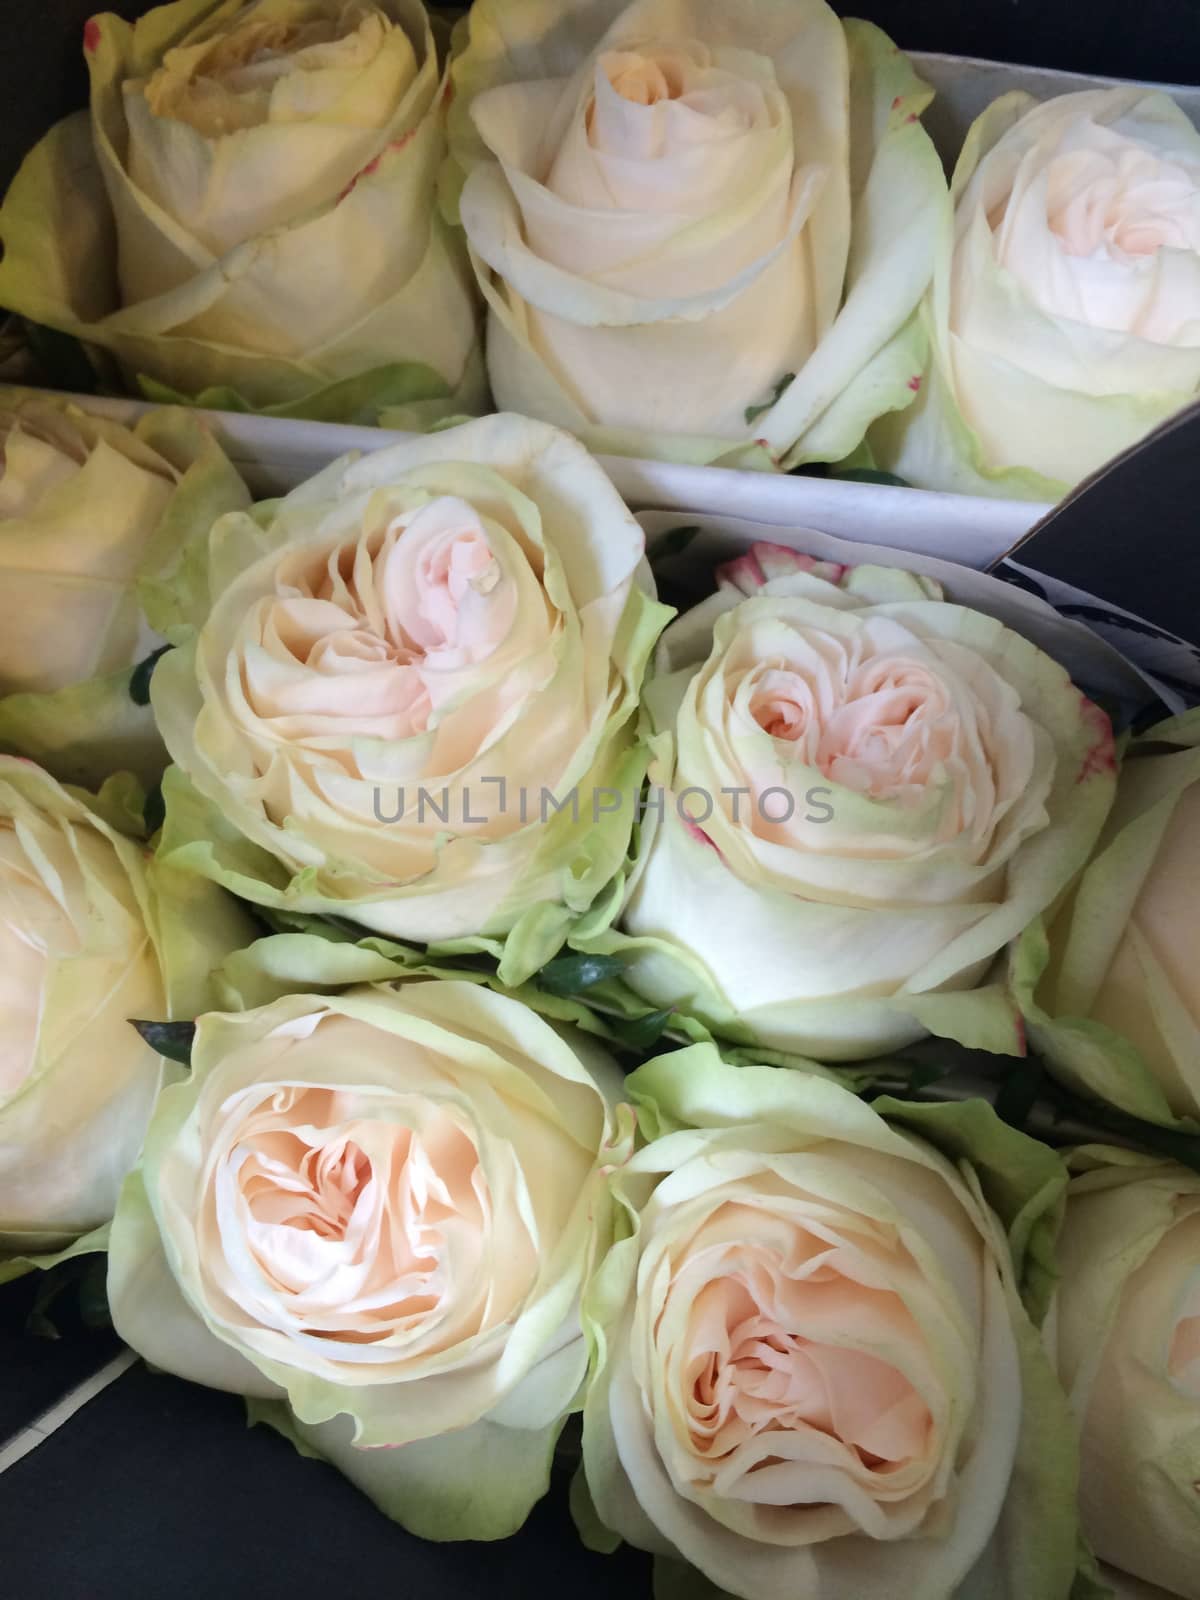 Light green and cream colored roses by mmm